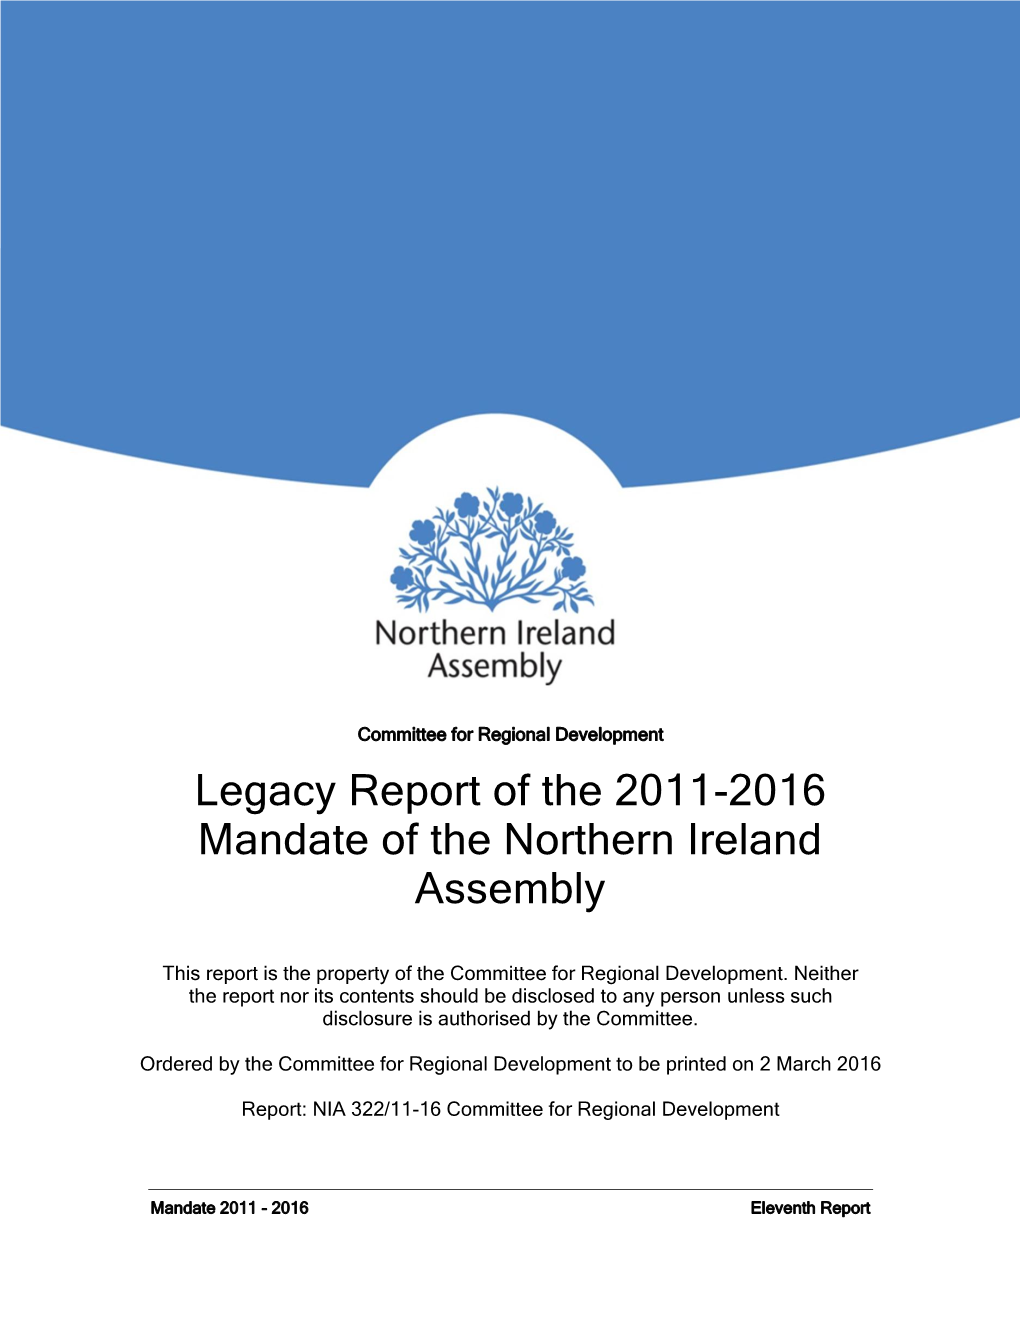 Legacy Report of the 2011-2016 Mandate of the Northern Ireland Assembly